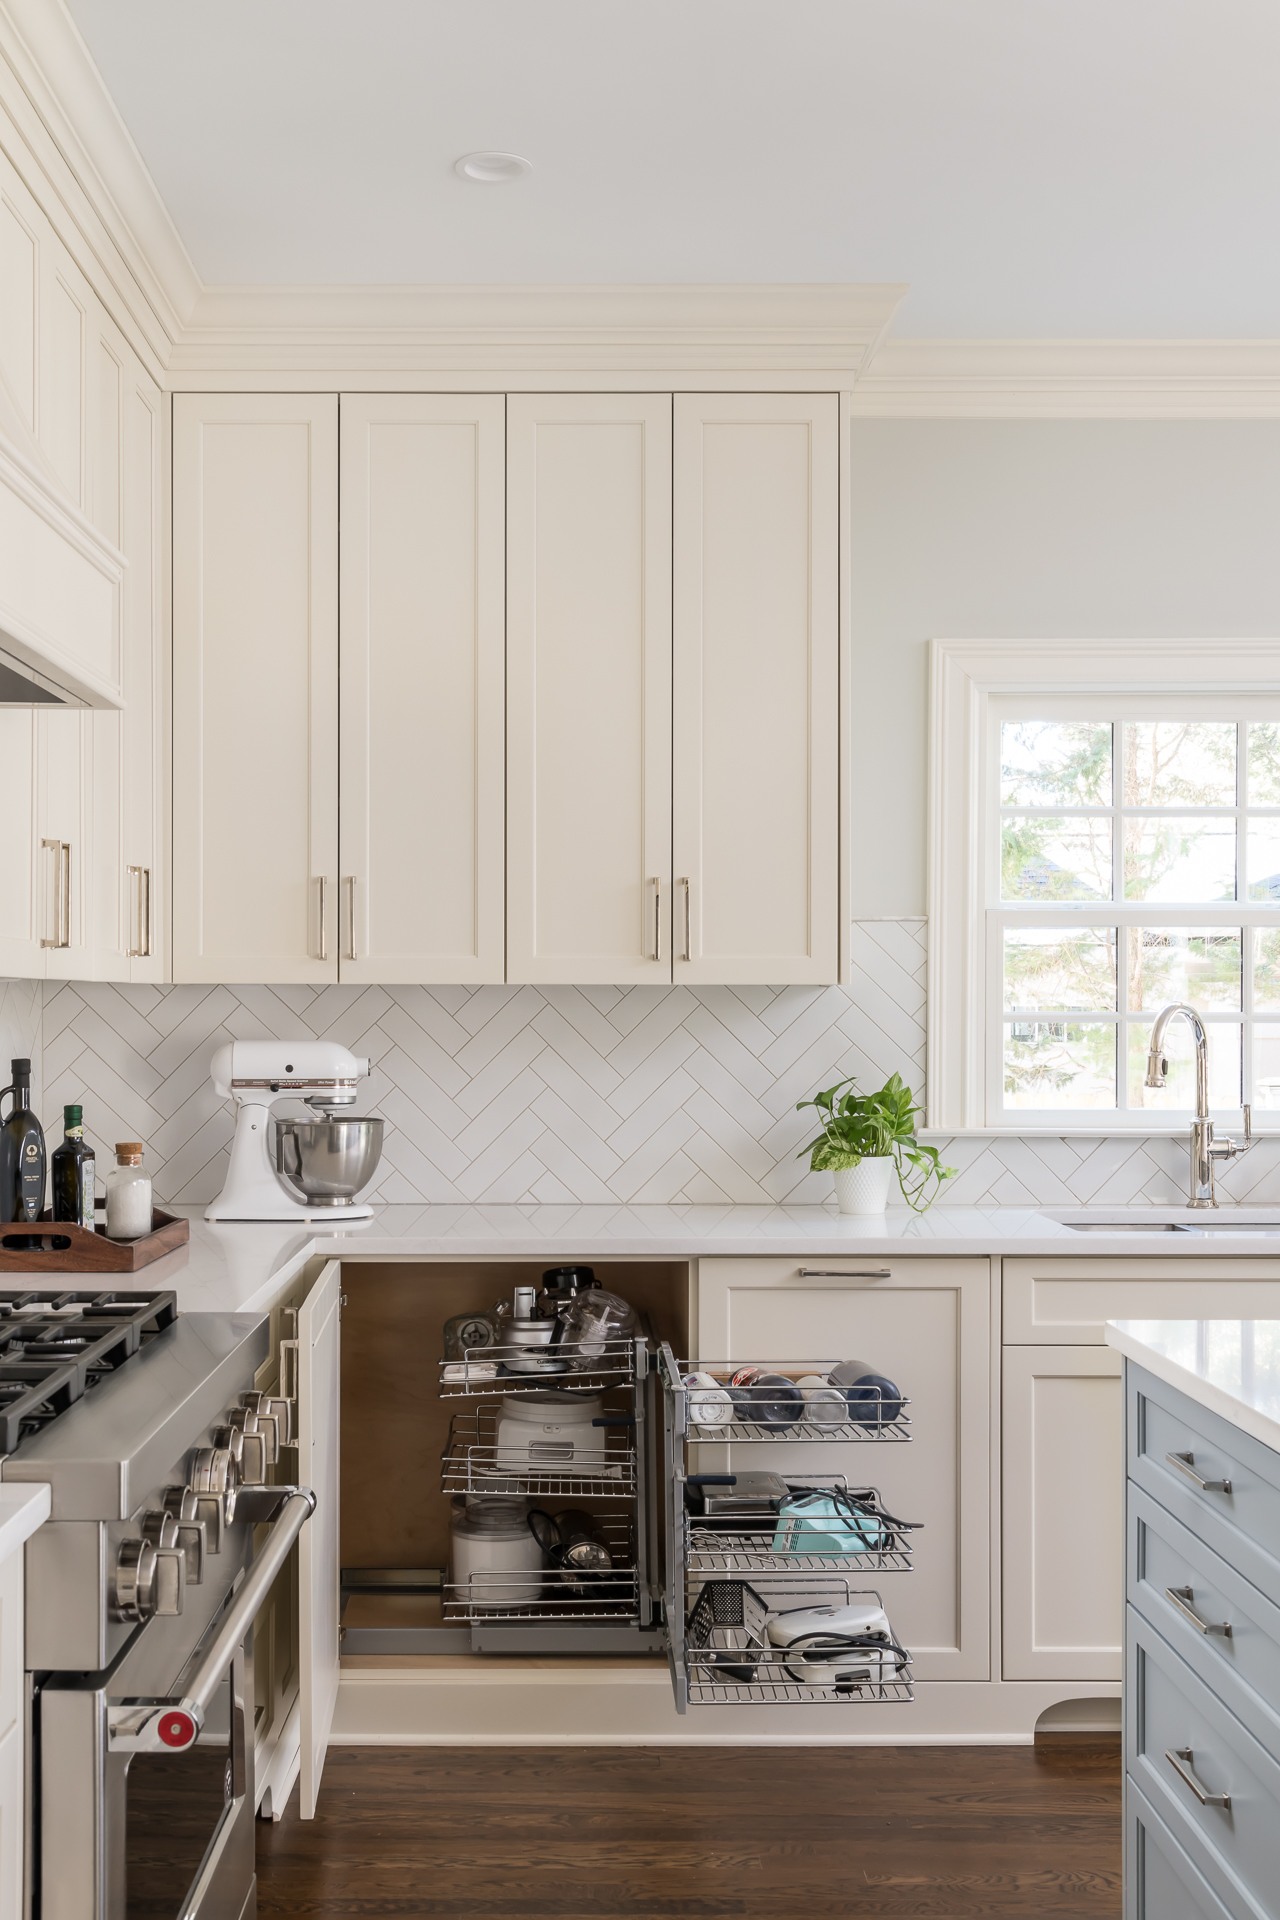 A transitional cottage kitchen featuring white cabinets, a stove, and a cozy ambiance.